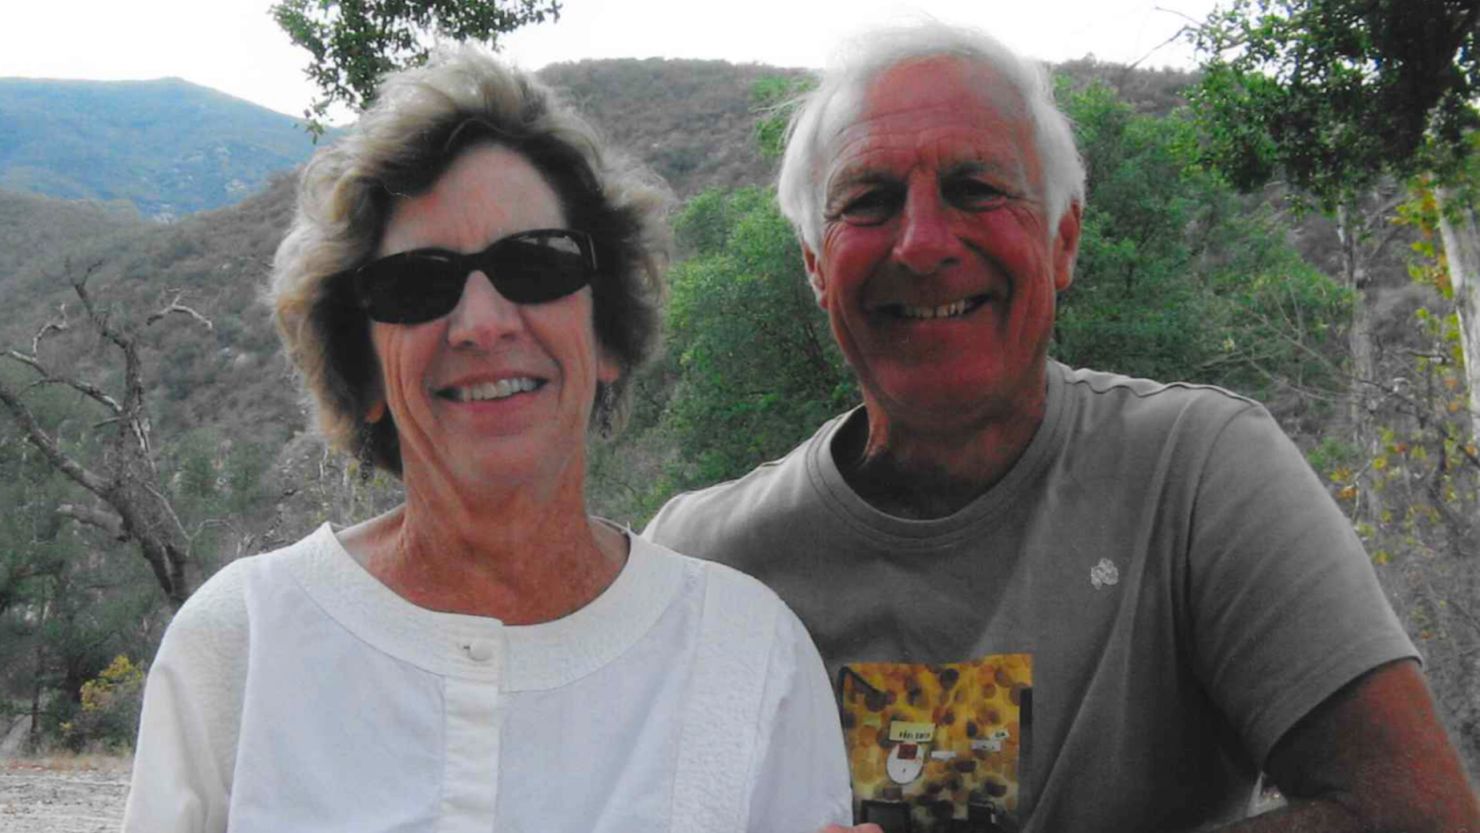 Judy Curtis and John Nears were both widowed and retired when they crossed paths on train traveling through Peru in 2004. Their fortuitous meeting led them both to unexpected happiness.